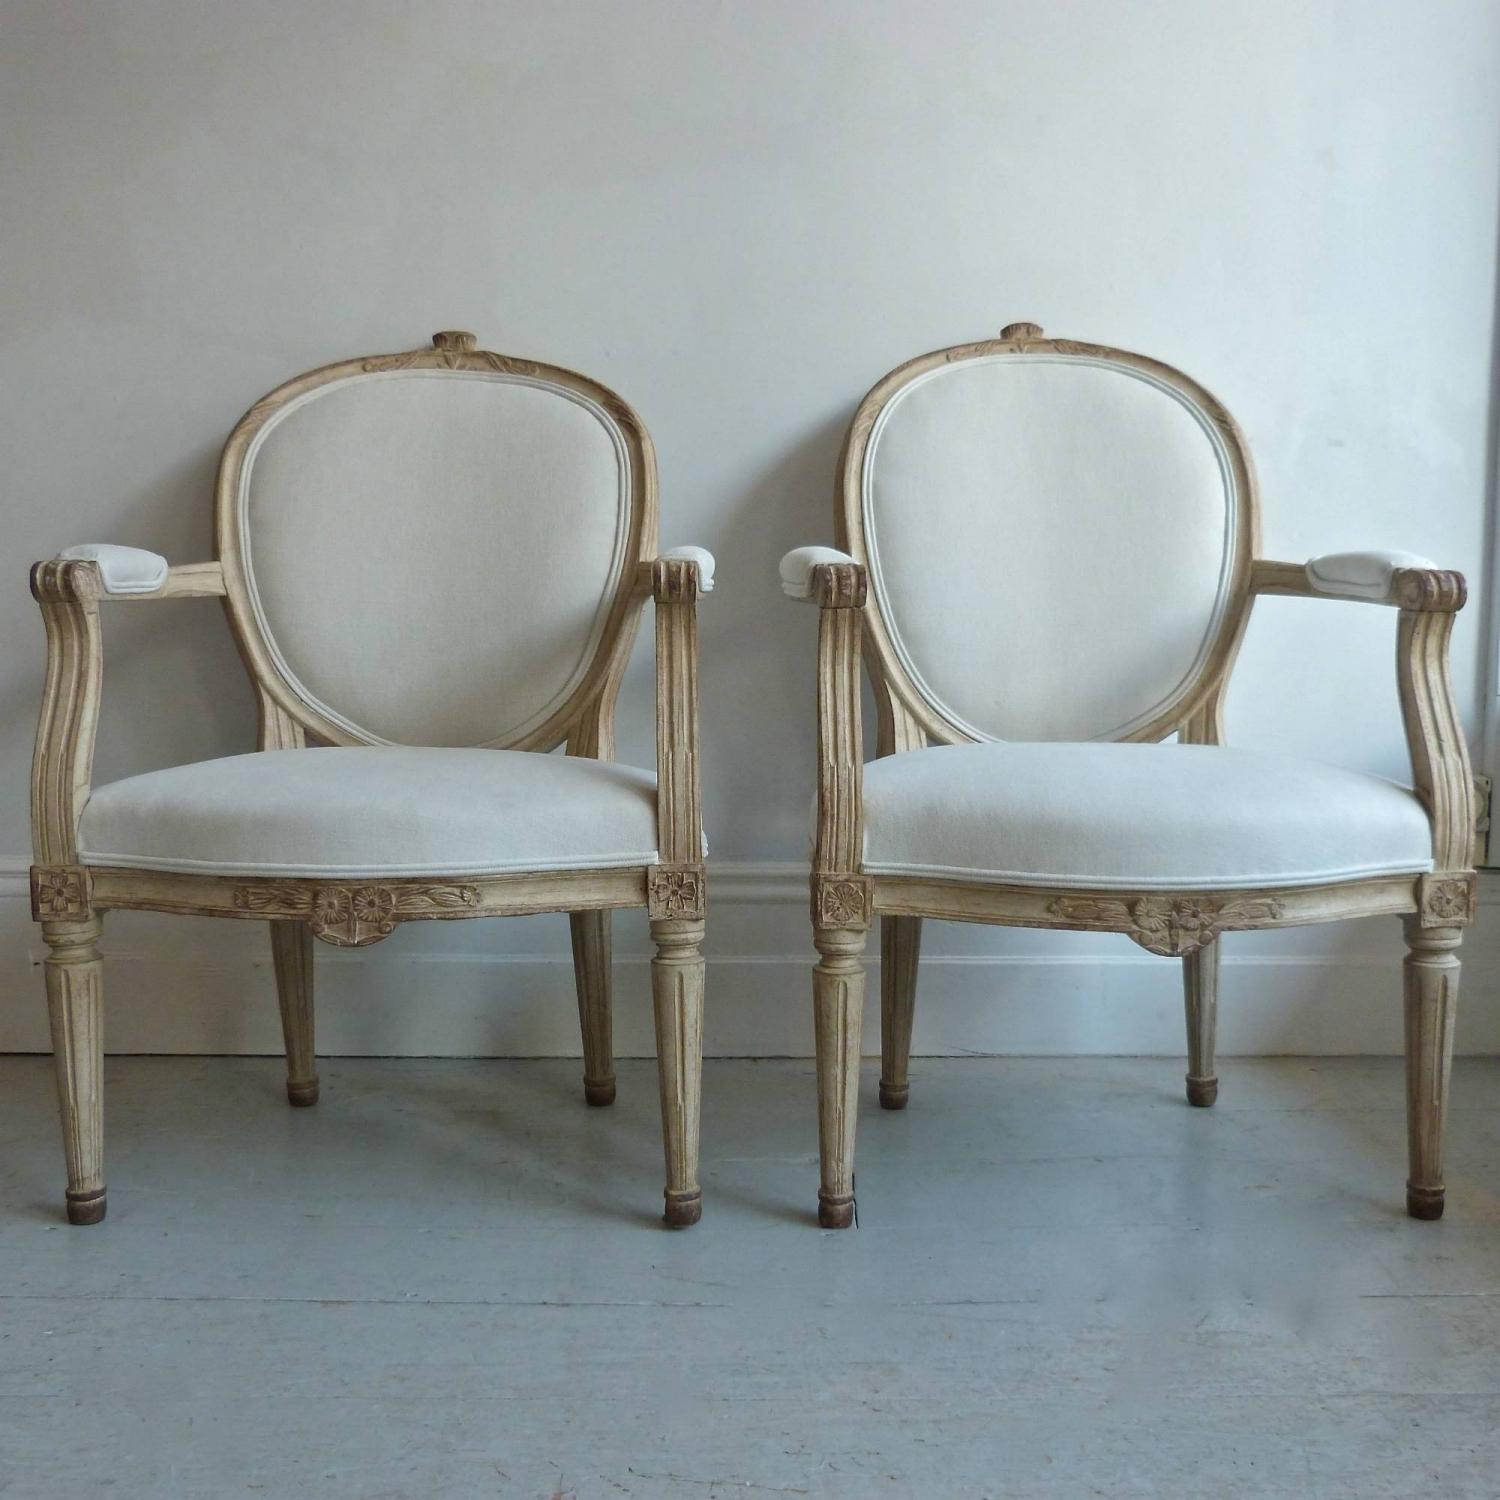 pair-of-gustavian-style-armchairs_10052_main_size3